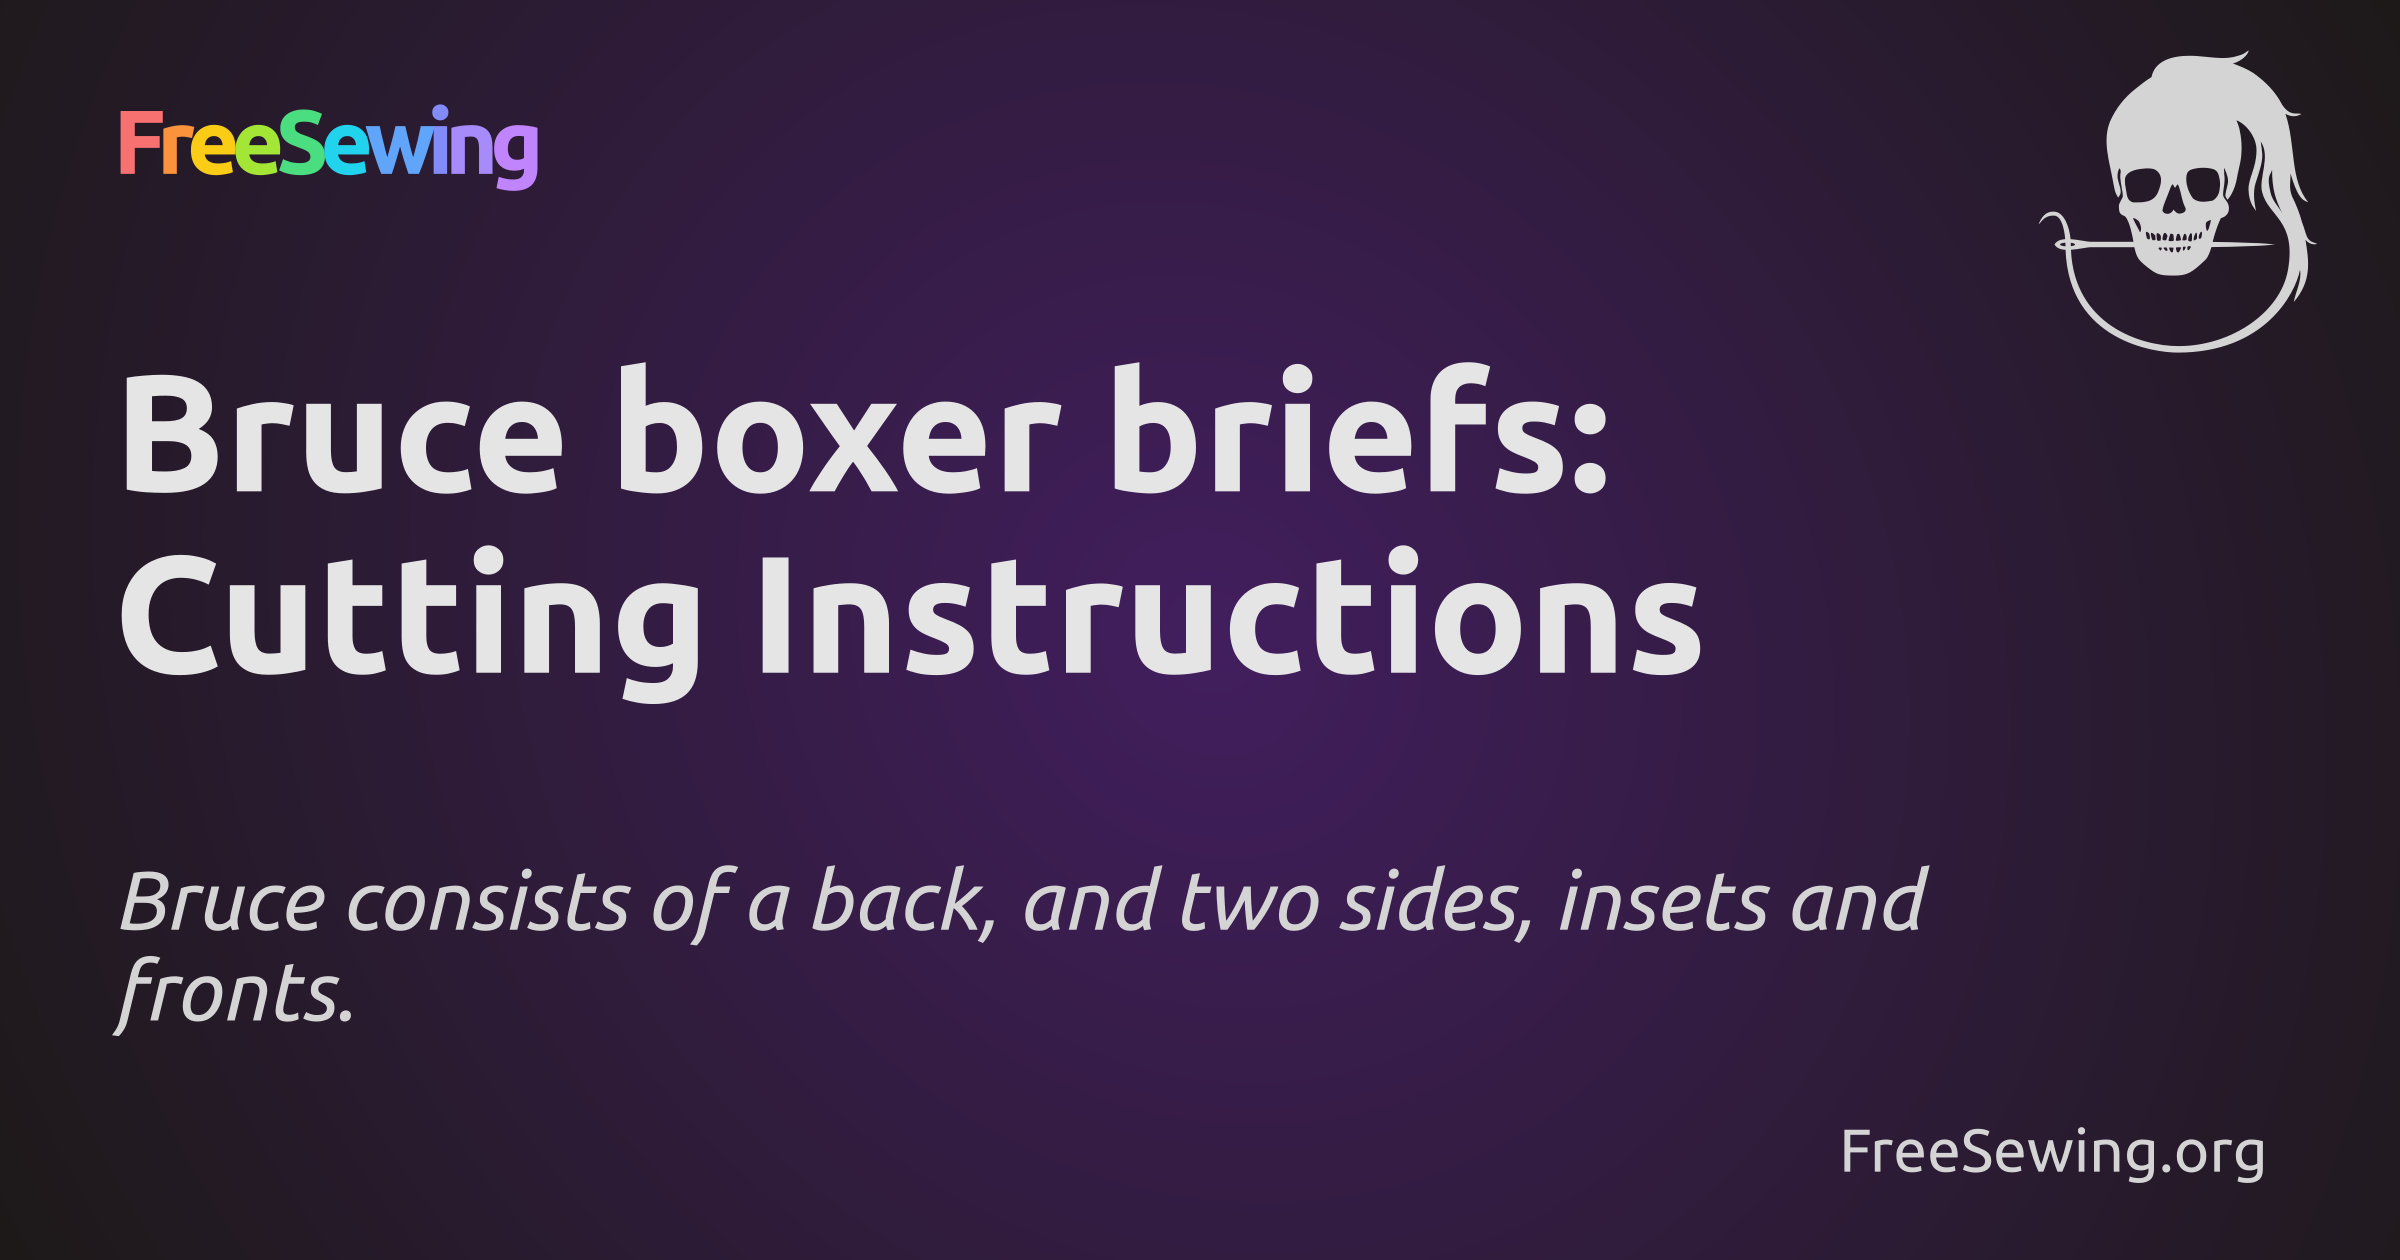 Bruce boxer briefs: Cutting Instructions